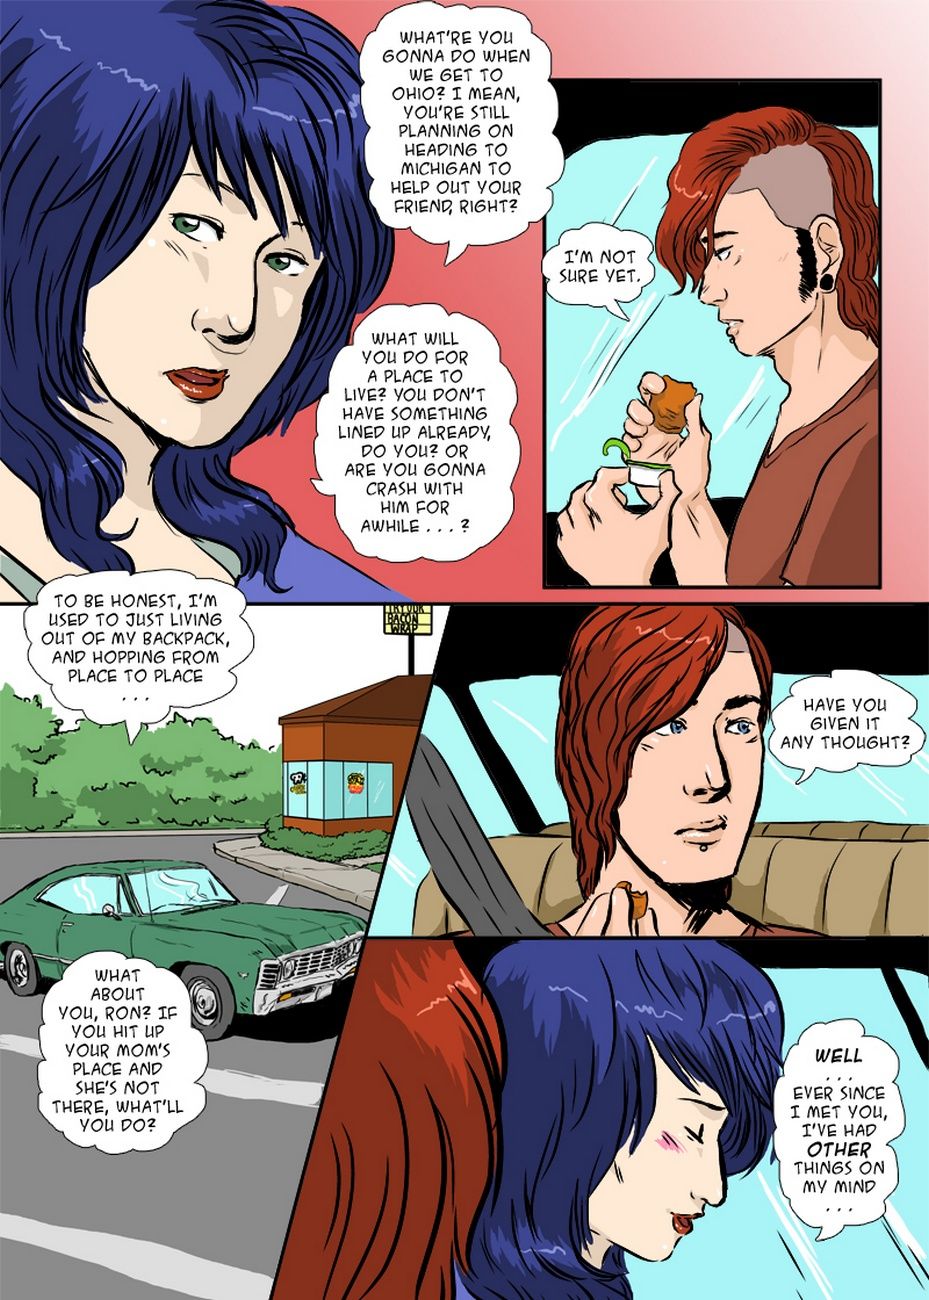 Cruise Control 4 - Wish You Were Here page 3